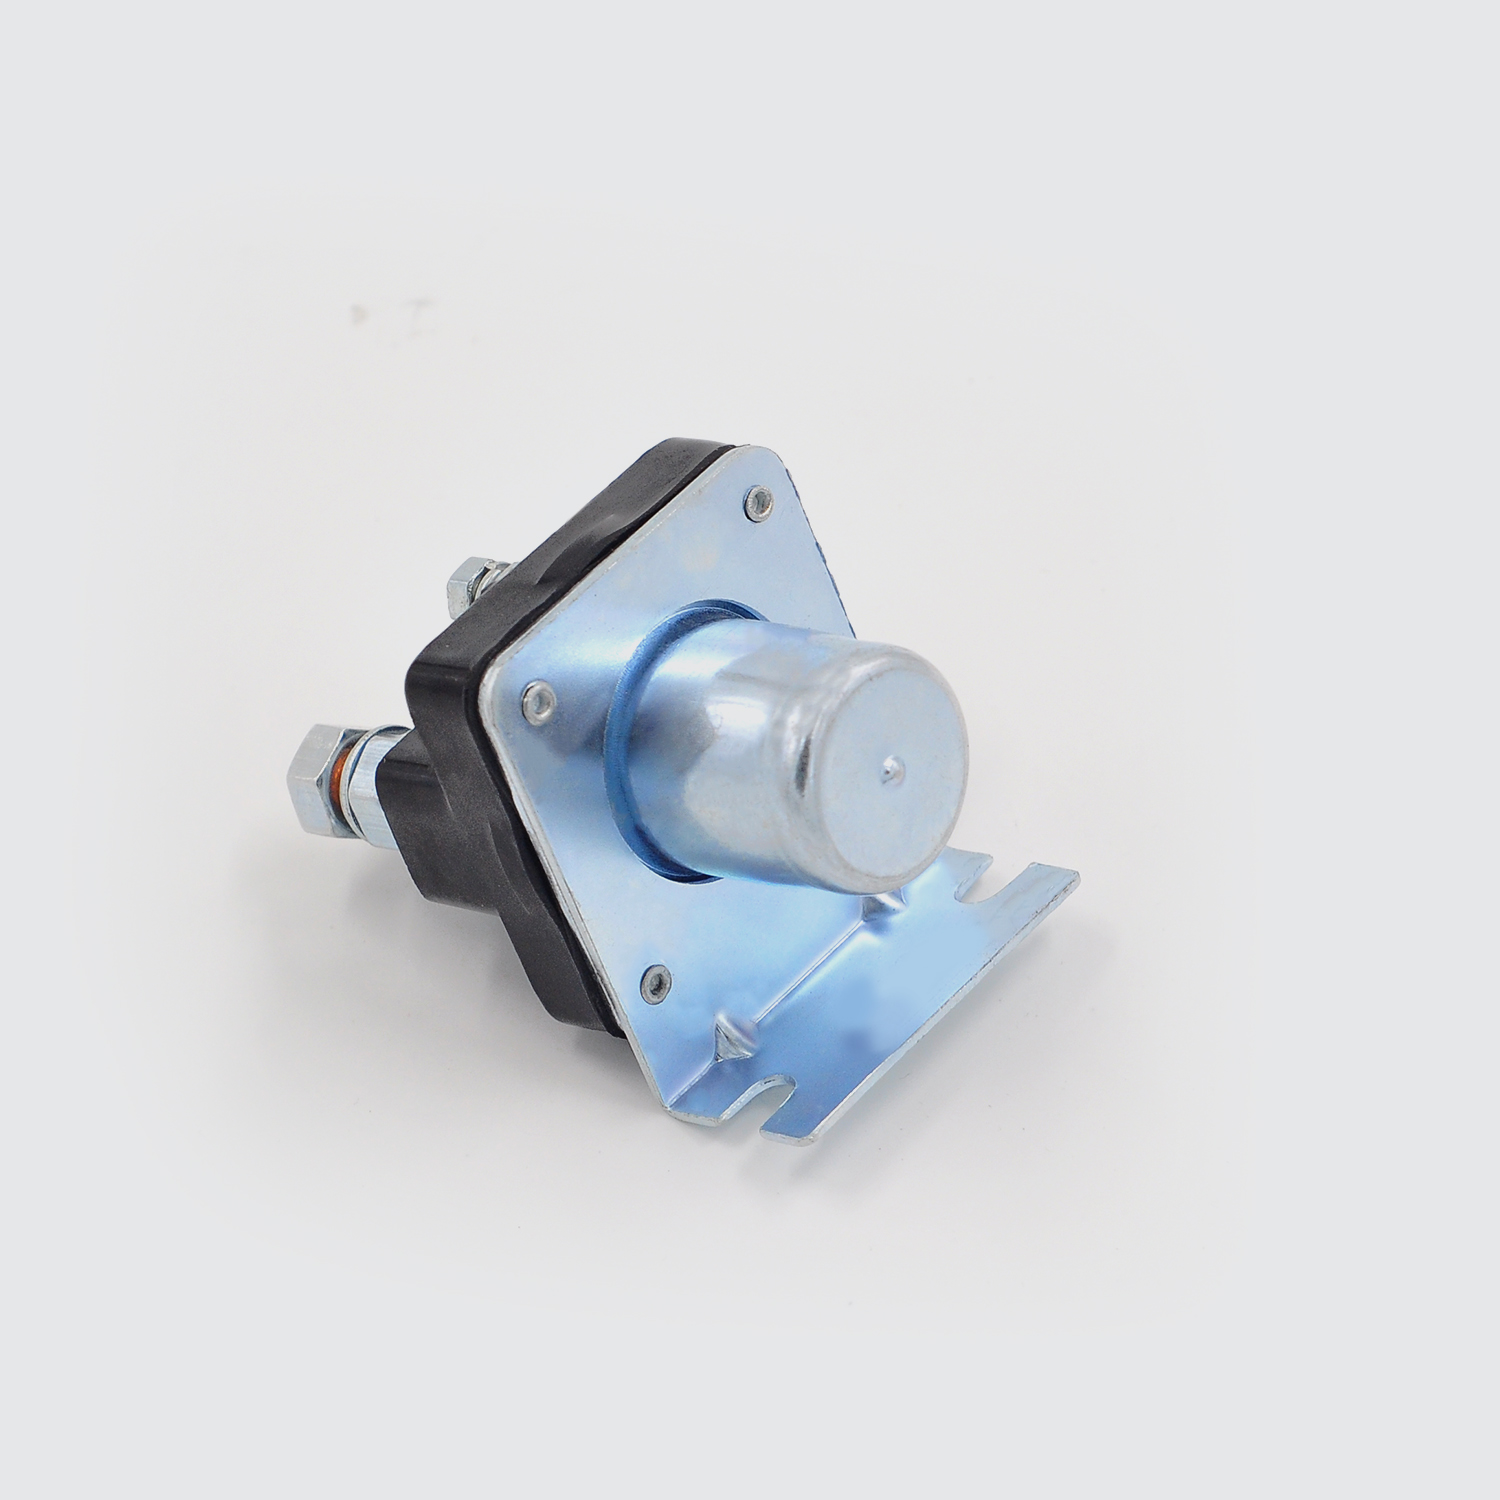 starter solenoid switch manufacturer in India